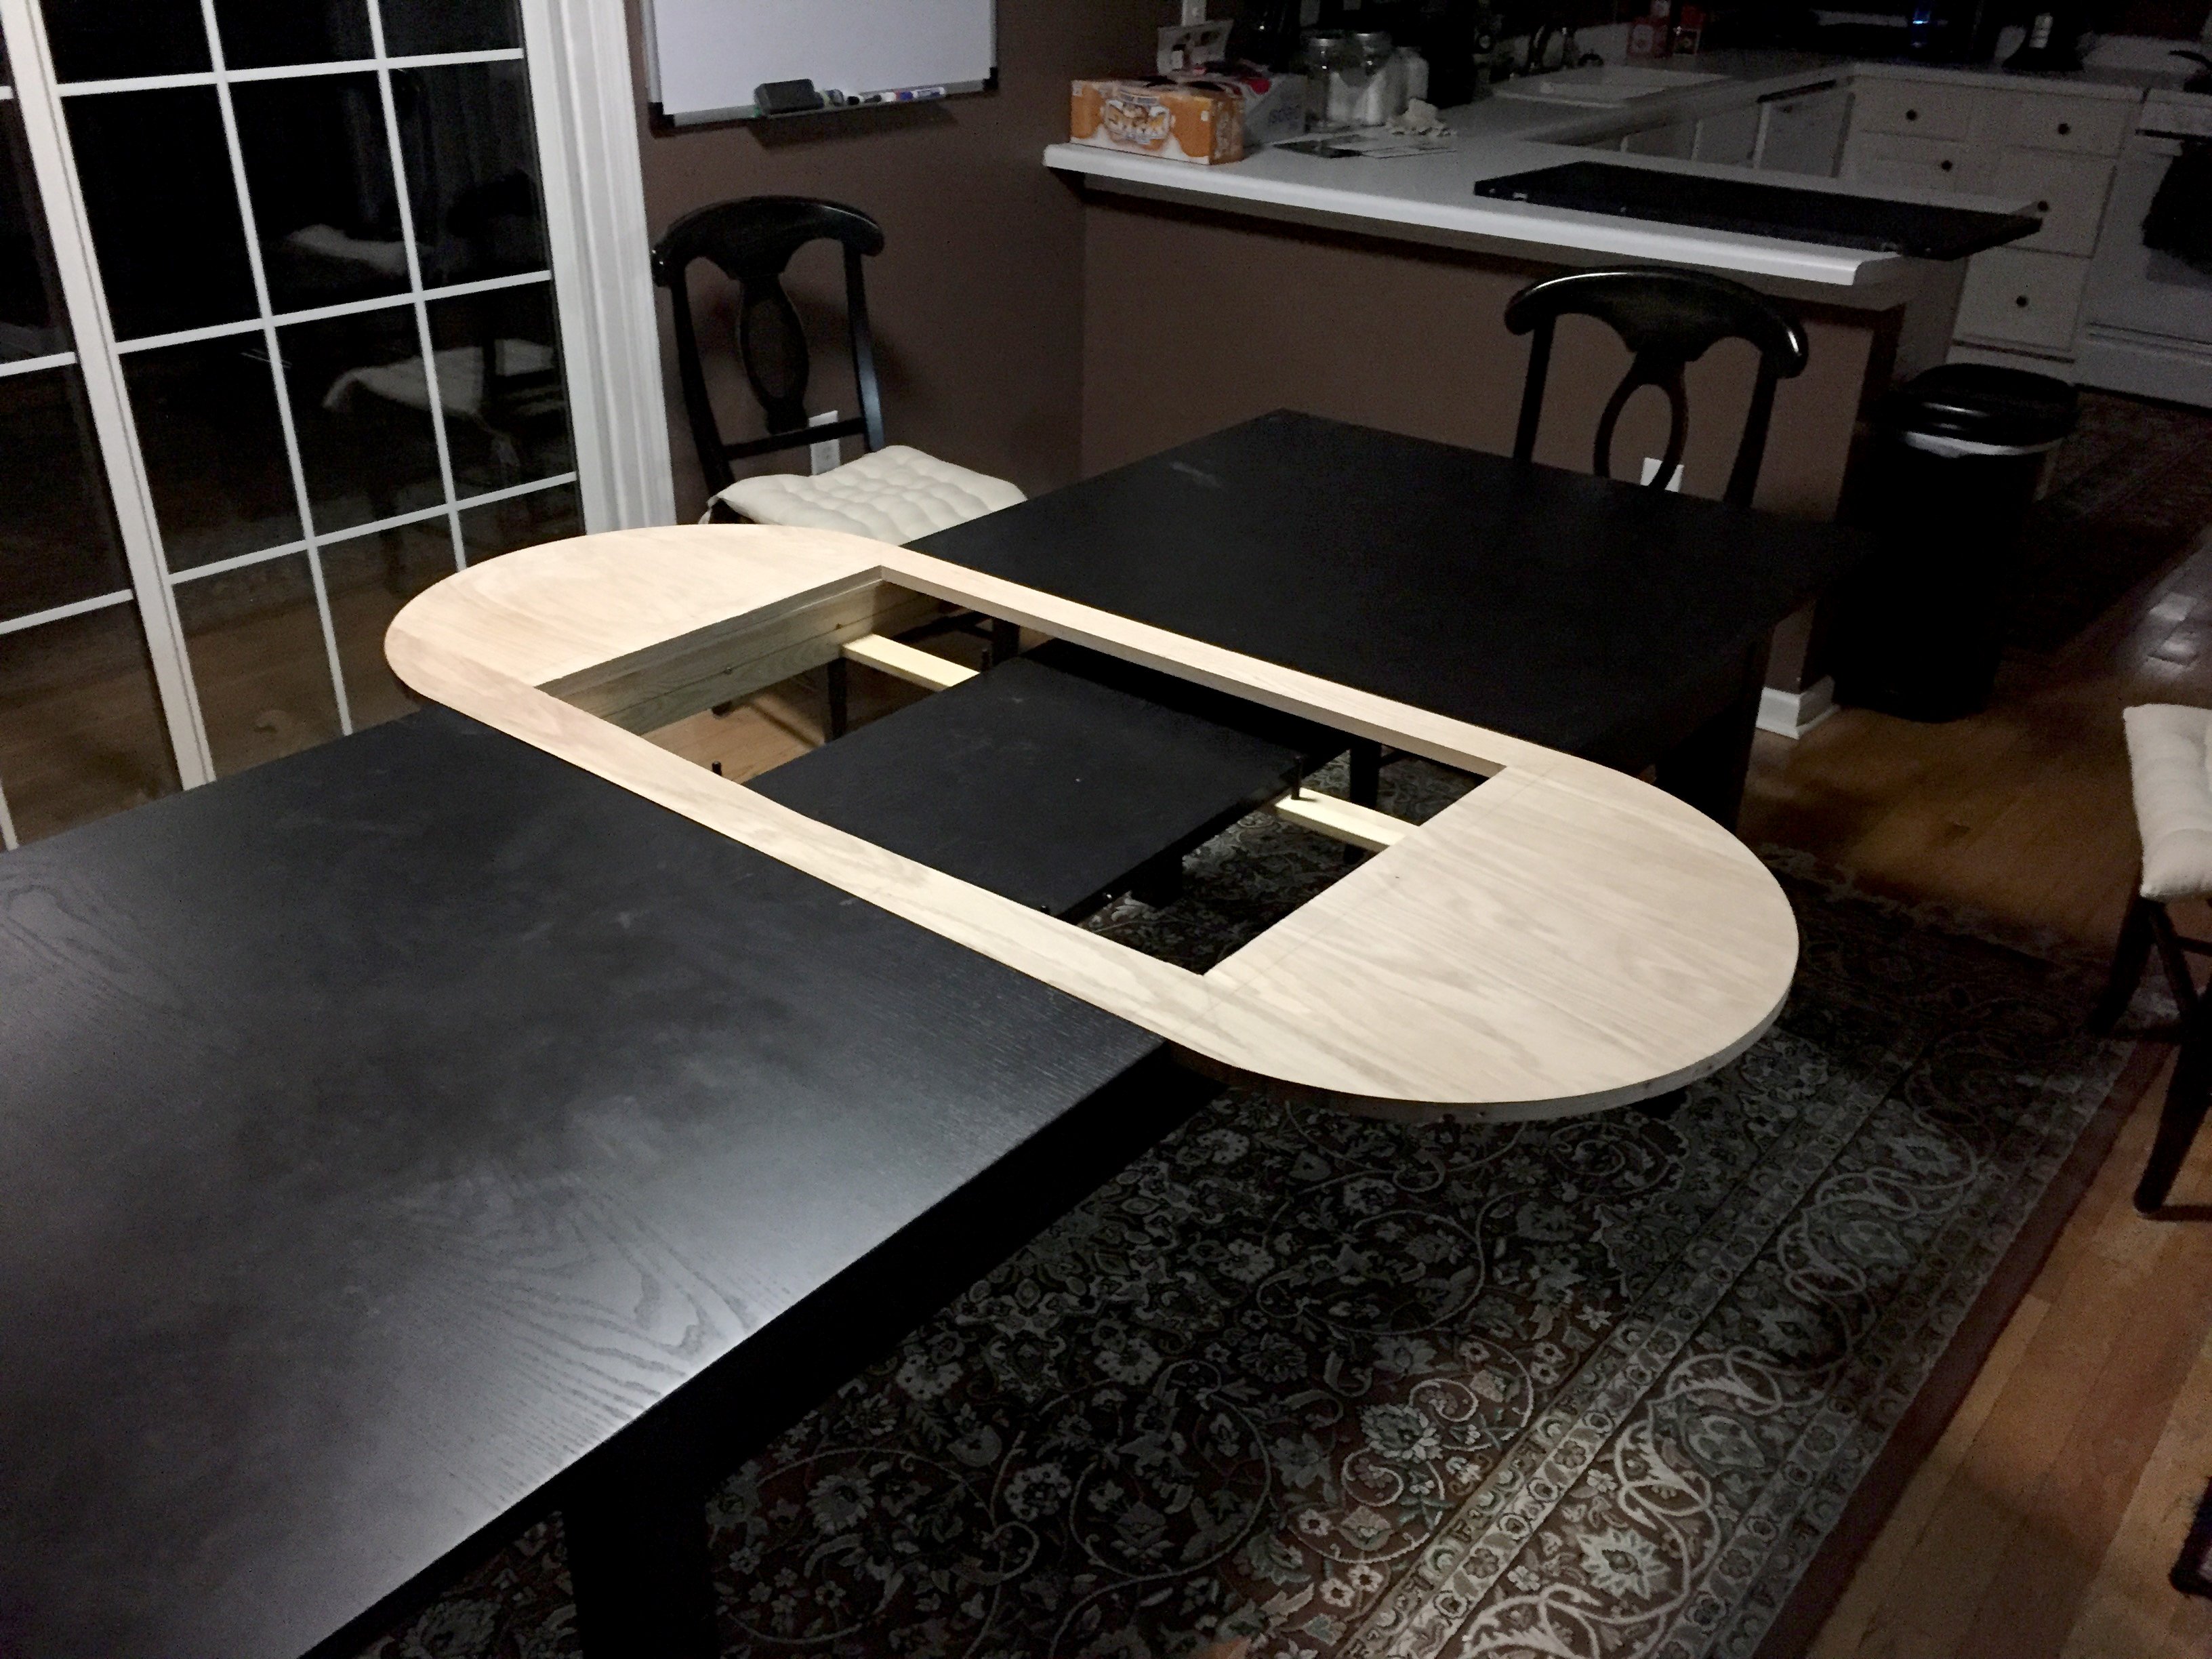 "The leafs for the table have little pegs and holes so that everything lines up. Because I wanted this to be an inset AND a free standing table I decided to only do the holes so that there wouldn't be any pegs sticking out of the finished table."